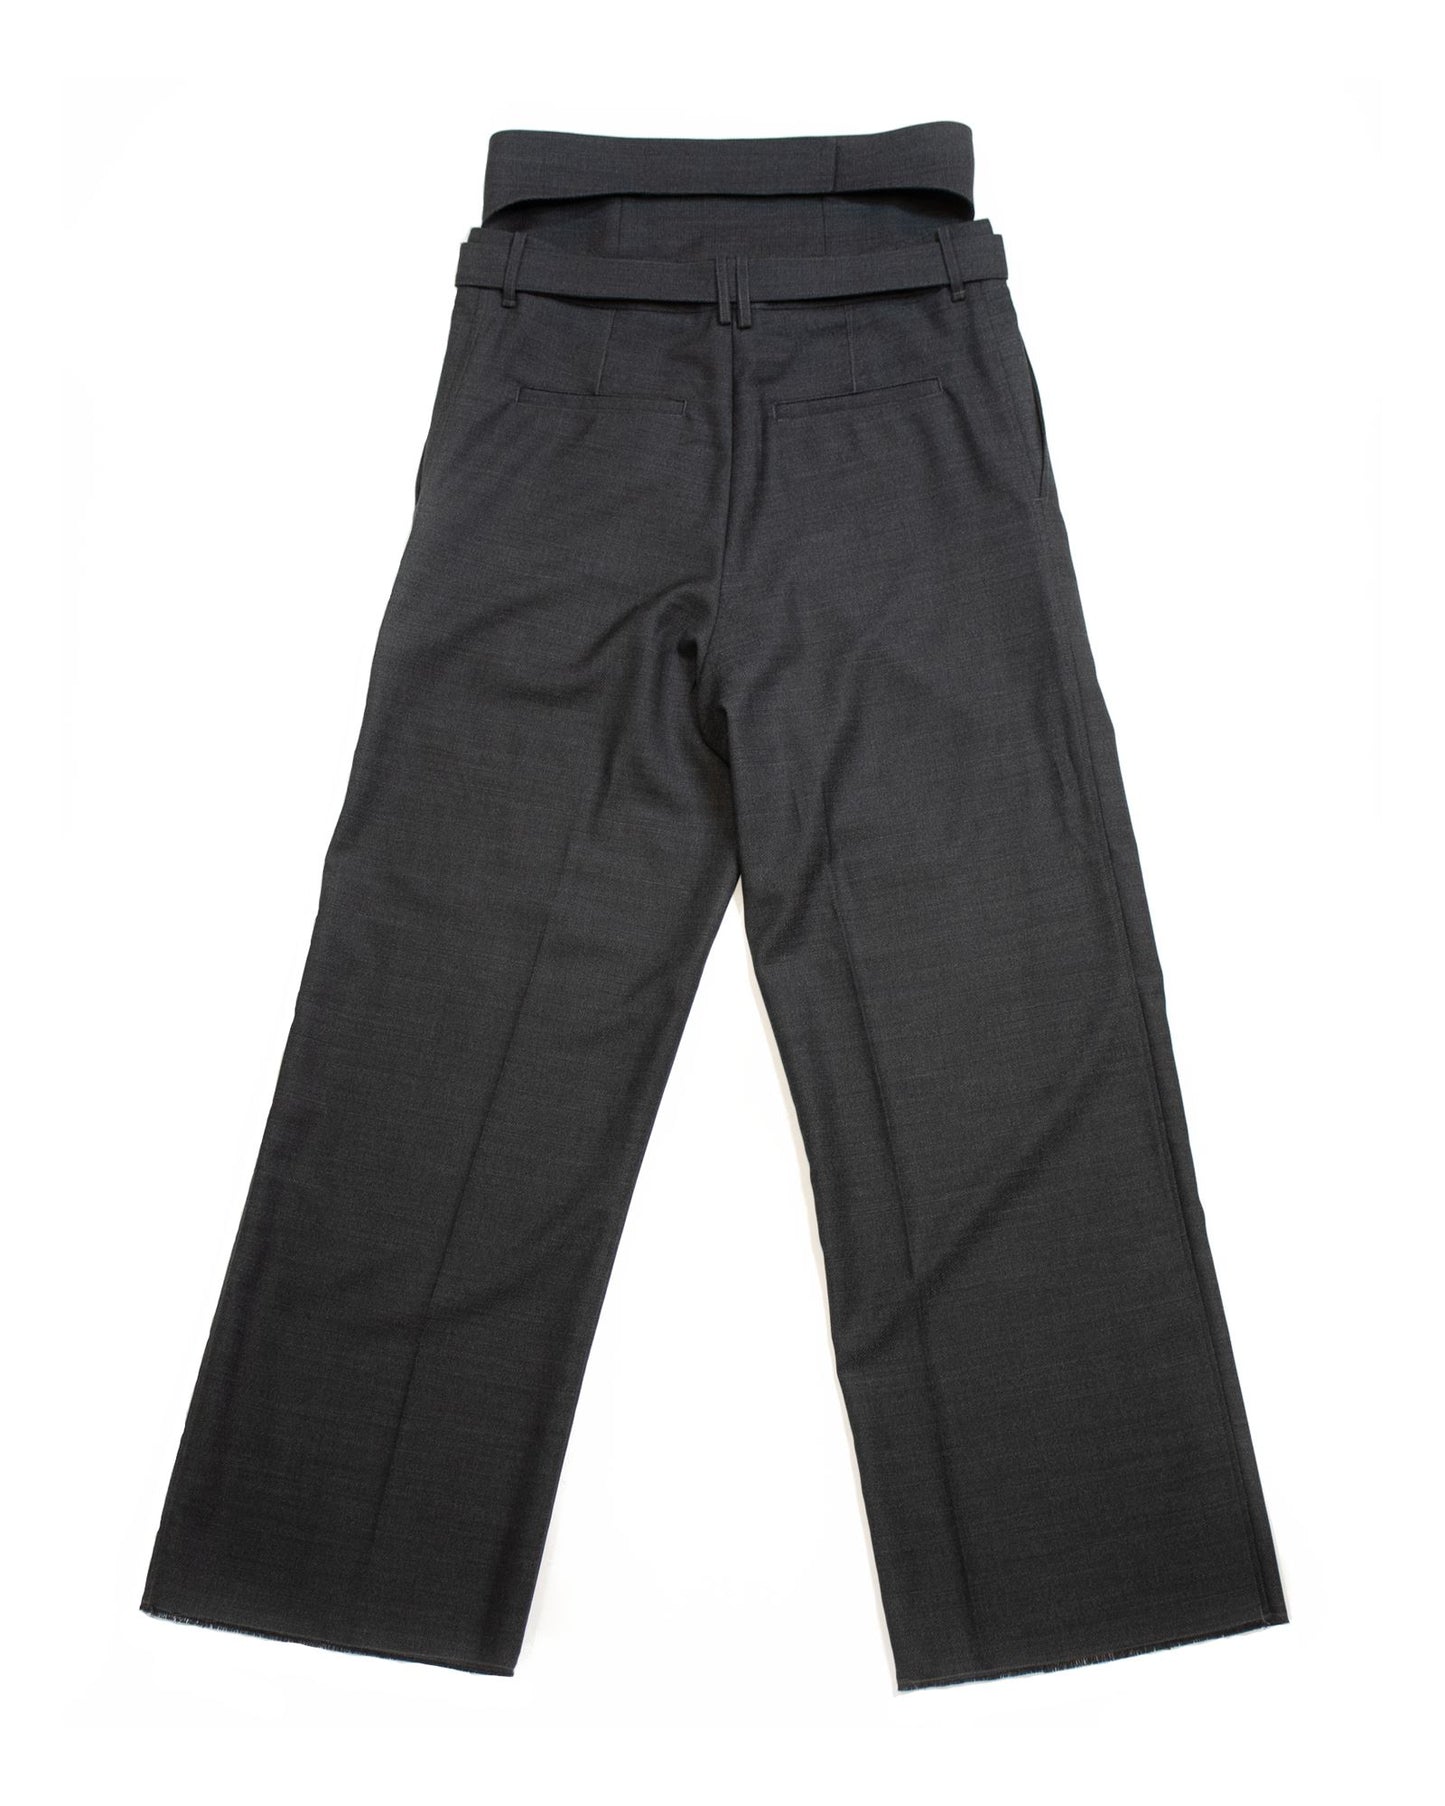 TWO WAIST FLARE TROUSER